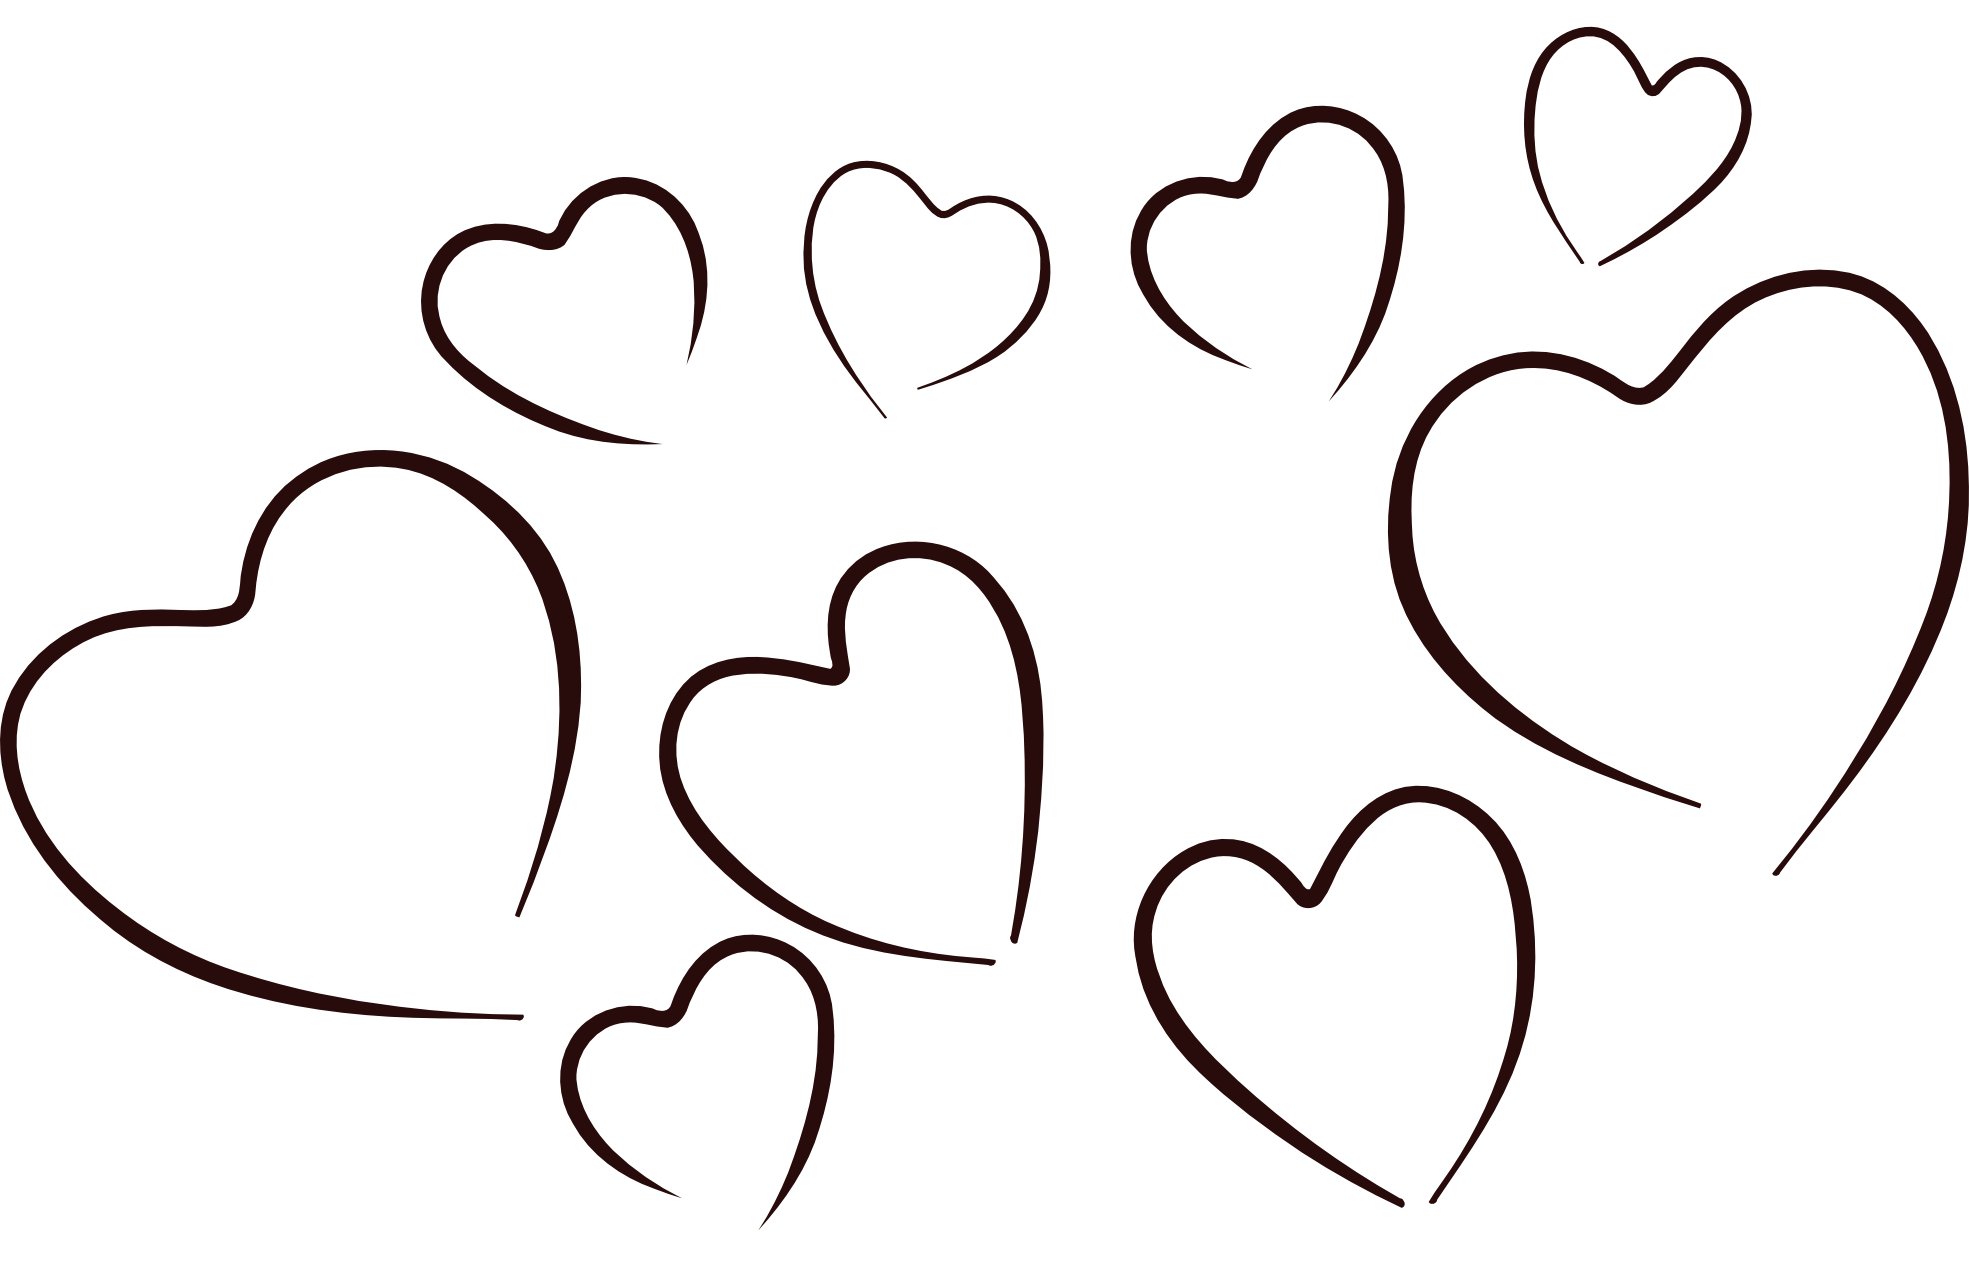 Clip Art Heart Black And Whit